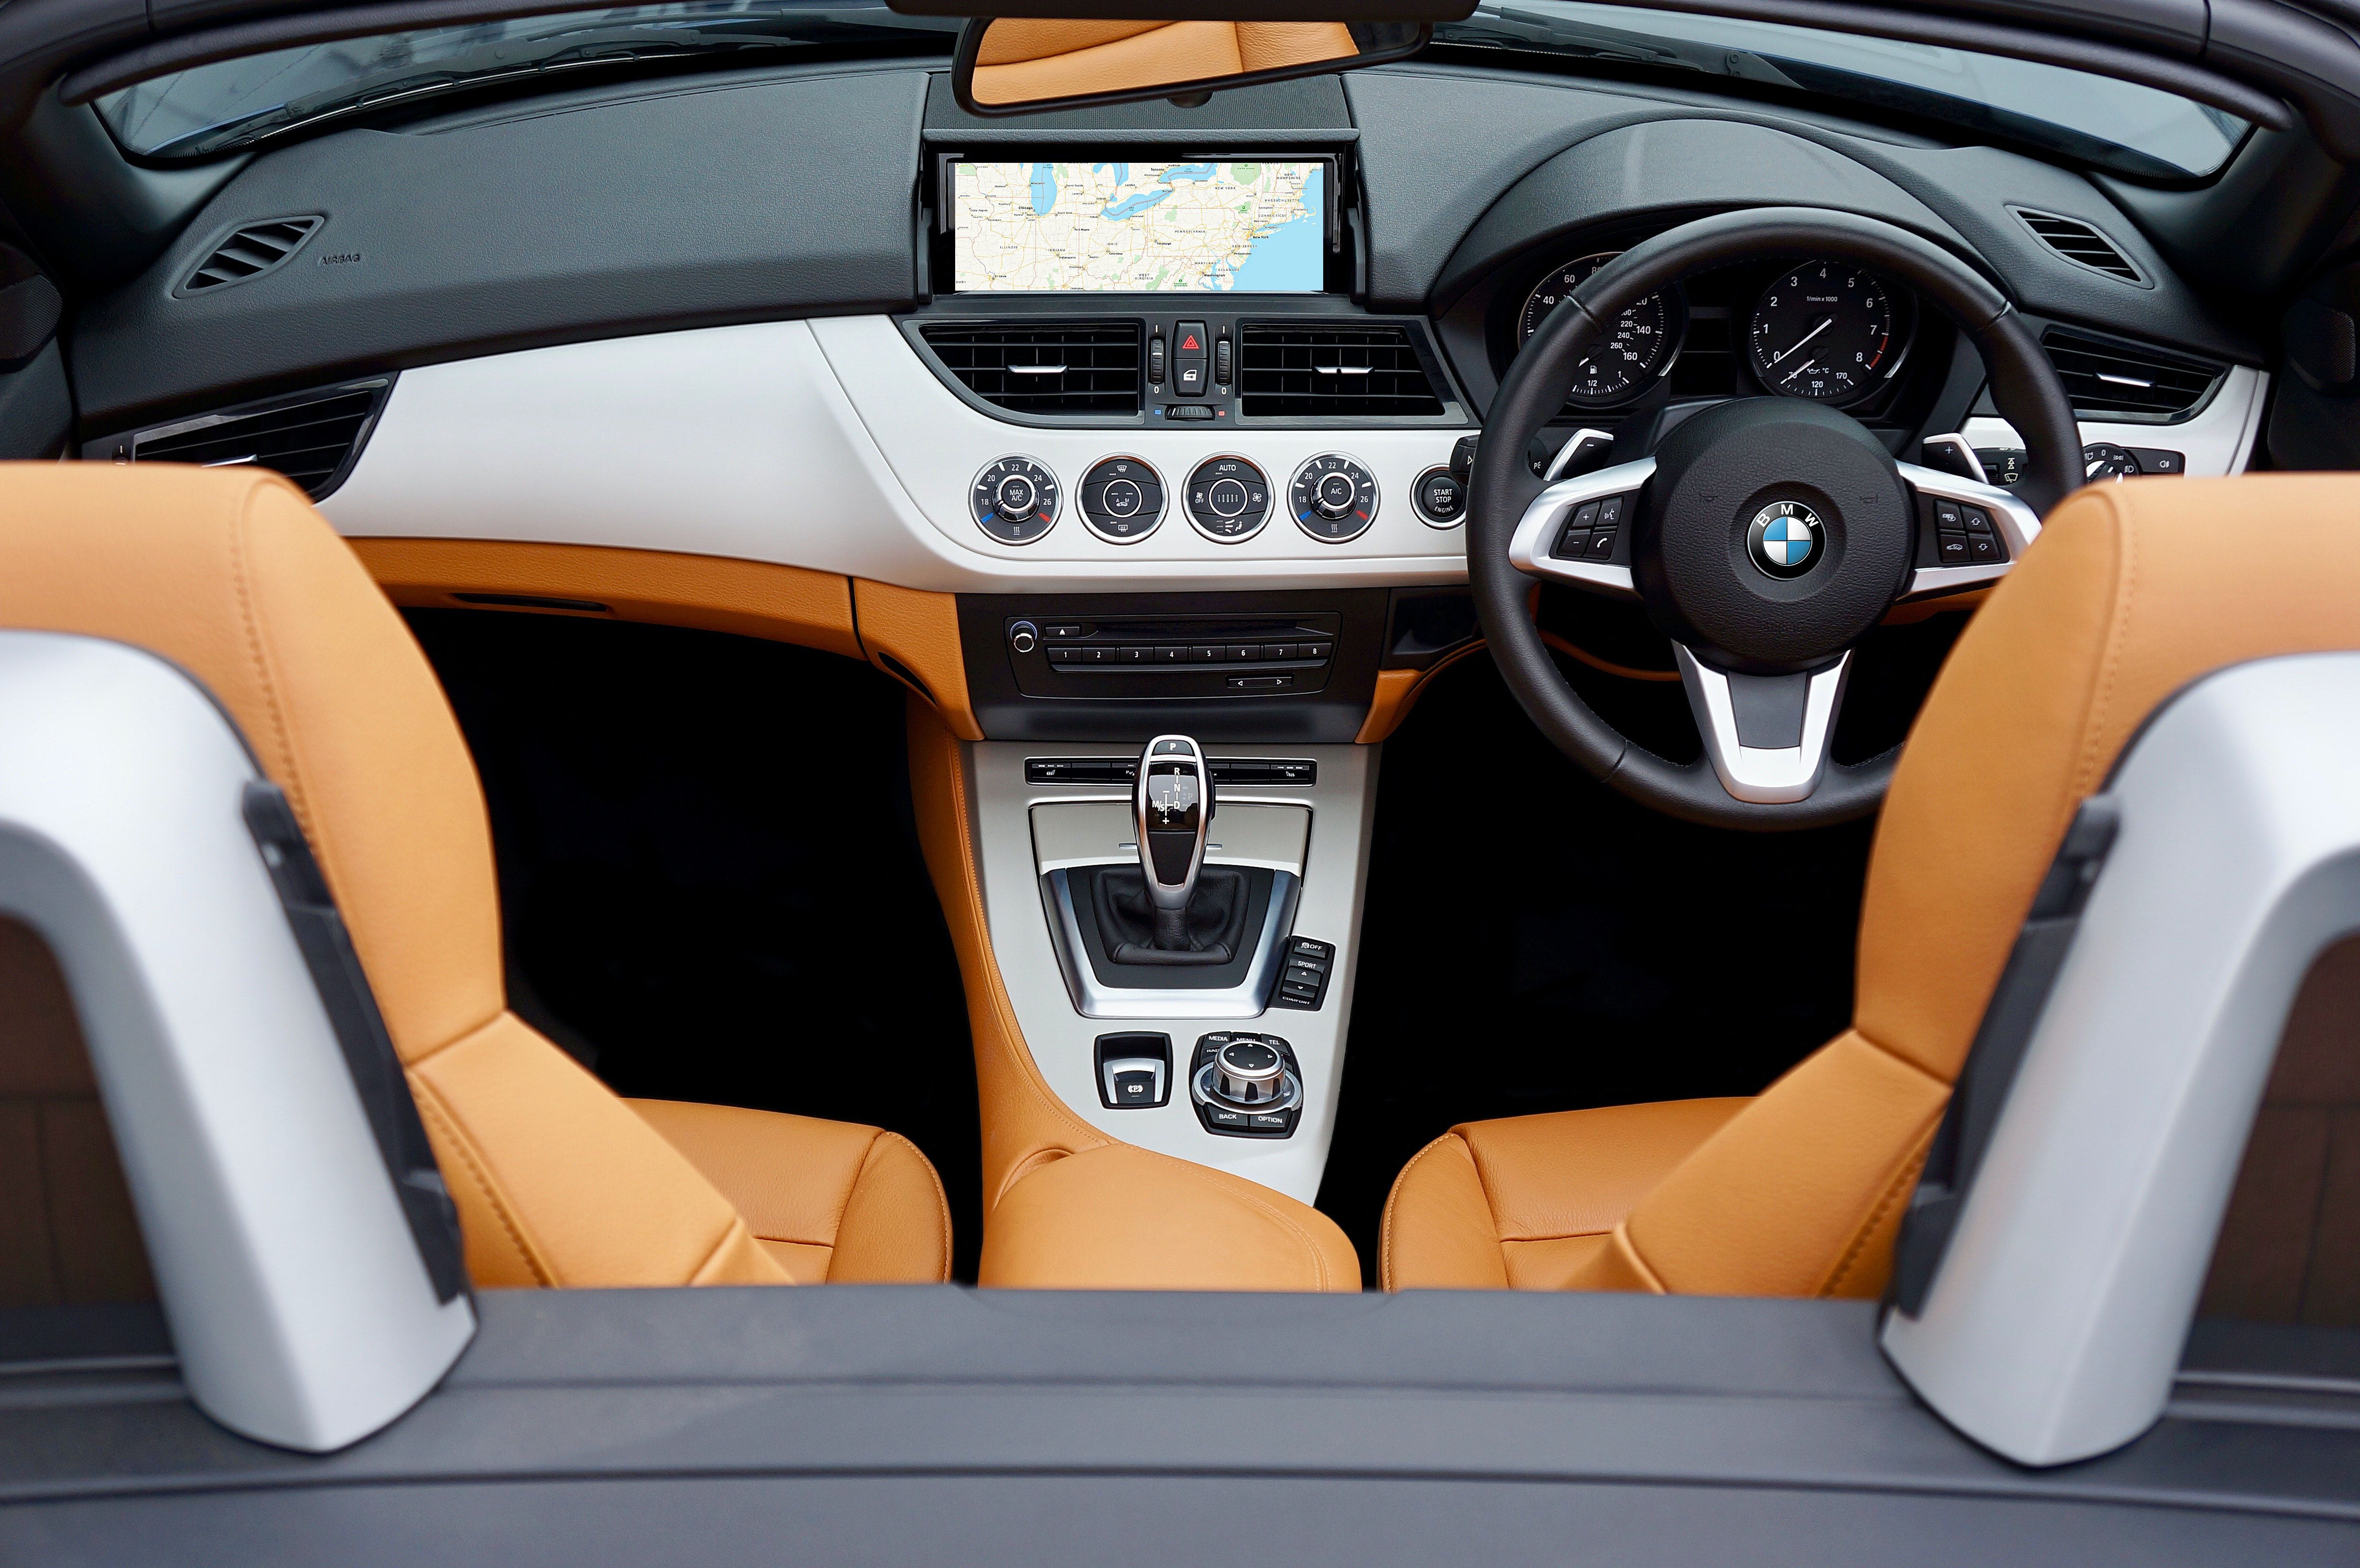 Black, Brown, and Gray Bmw Car Interior View · Free